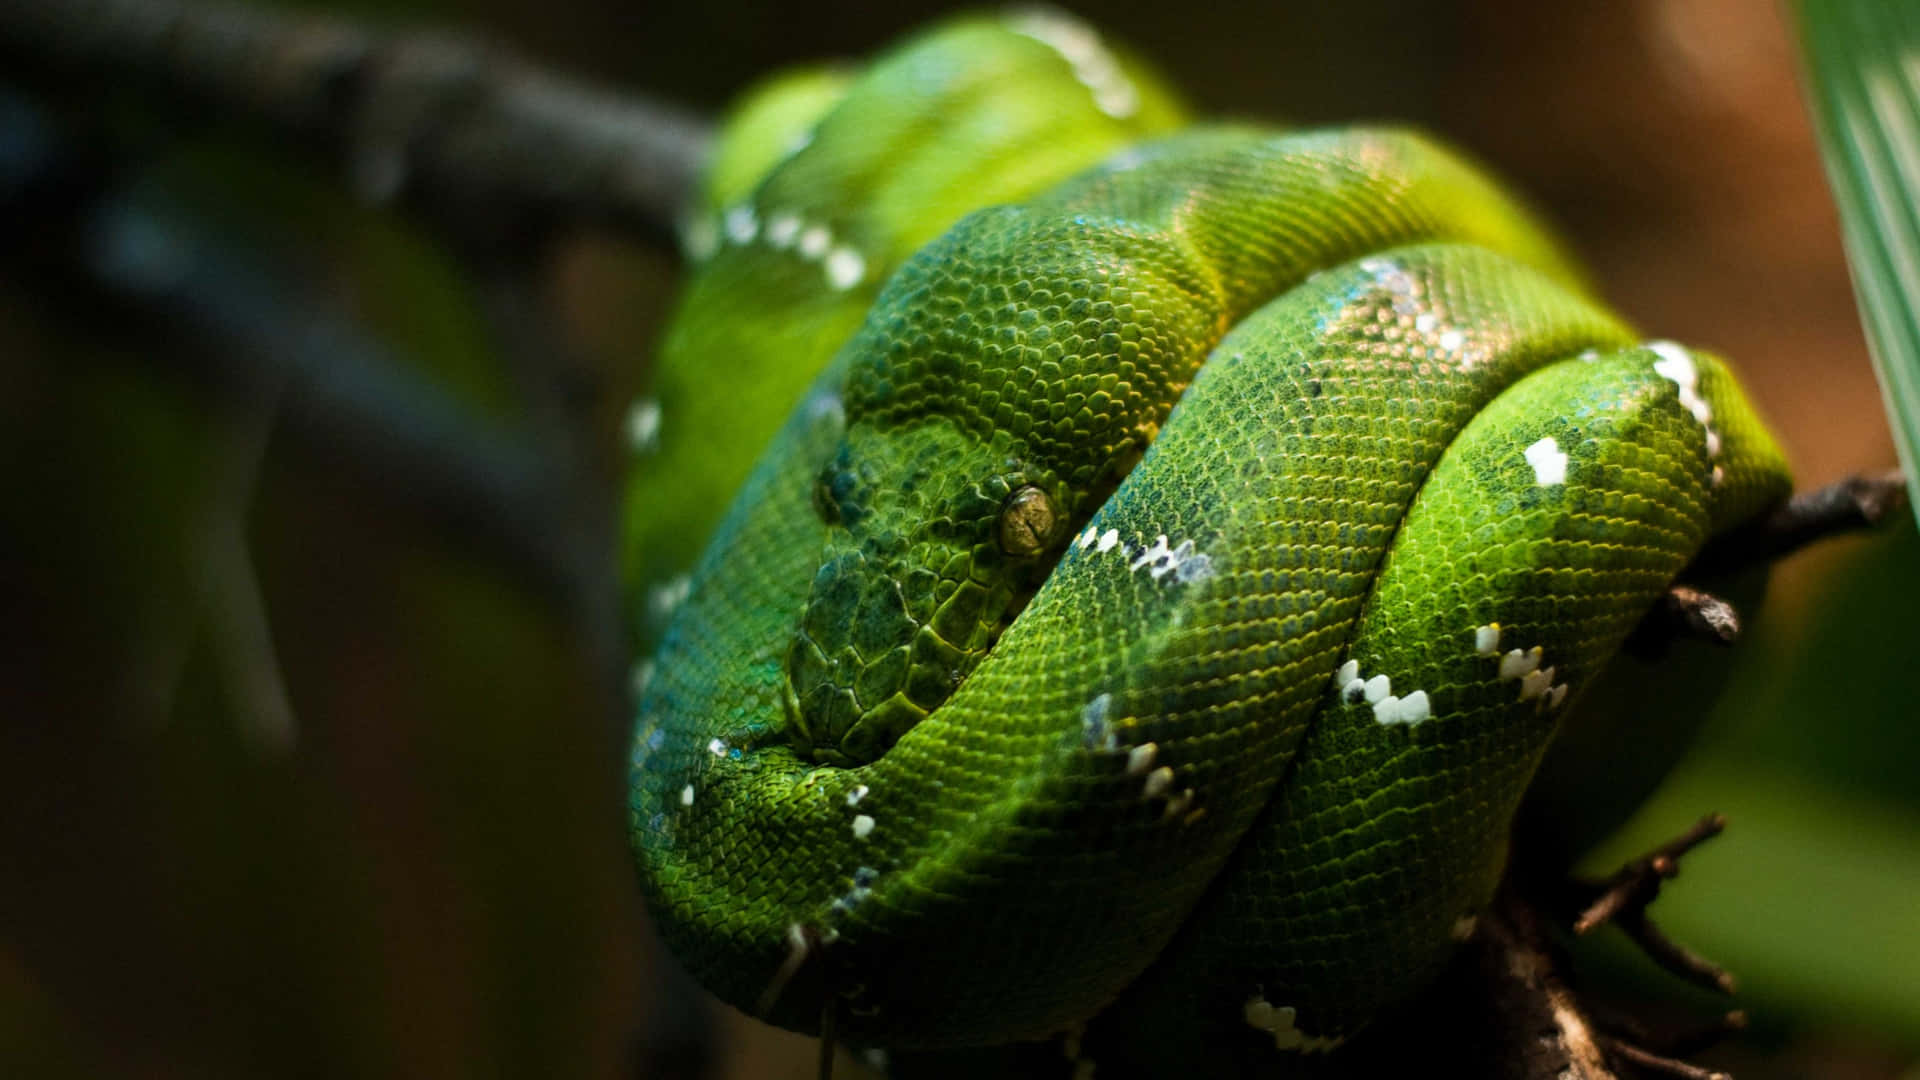 "The beauty of Python coding" Wallpaper